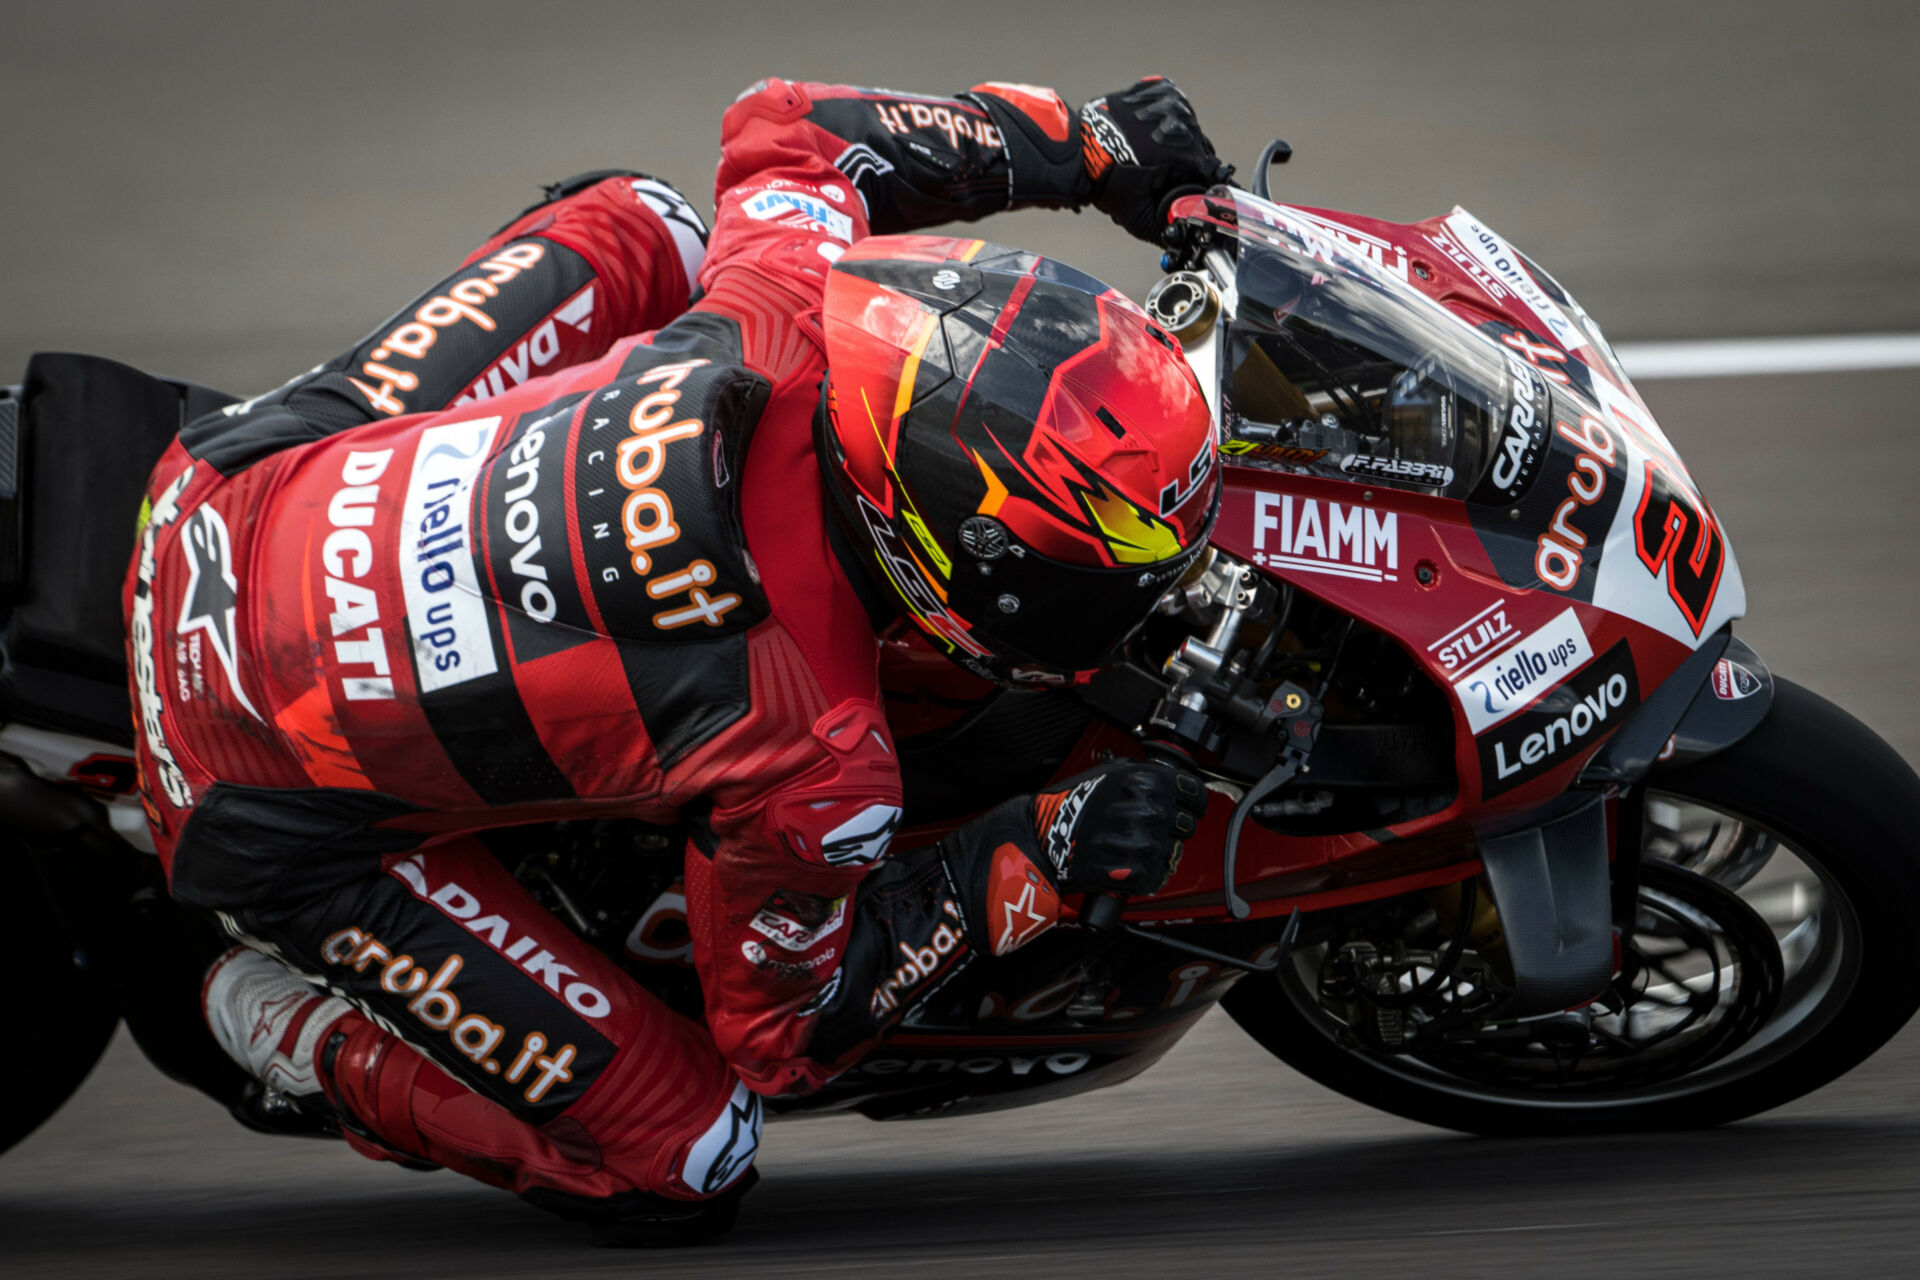 Michael Rinaldi (21) set the pace during WorldSBK practice Friday in Indonesia. Photo courtesy Ducati.